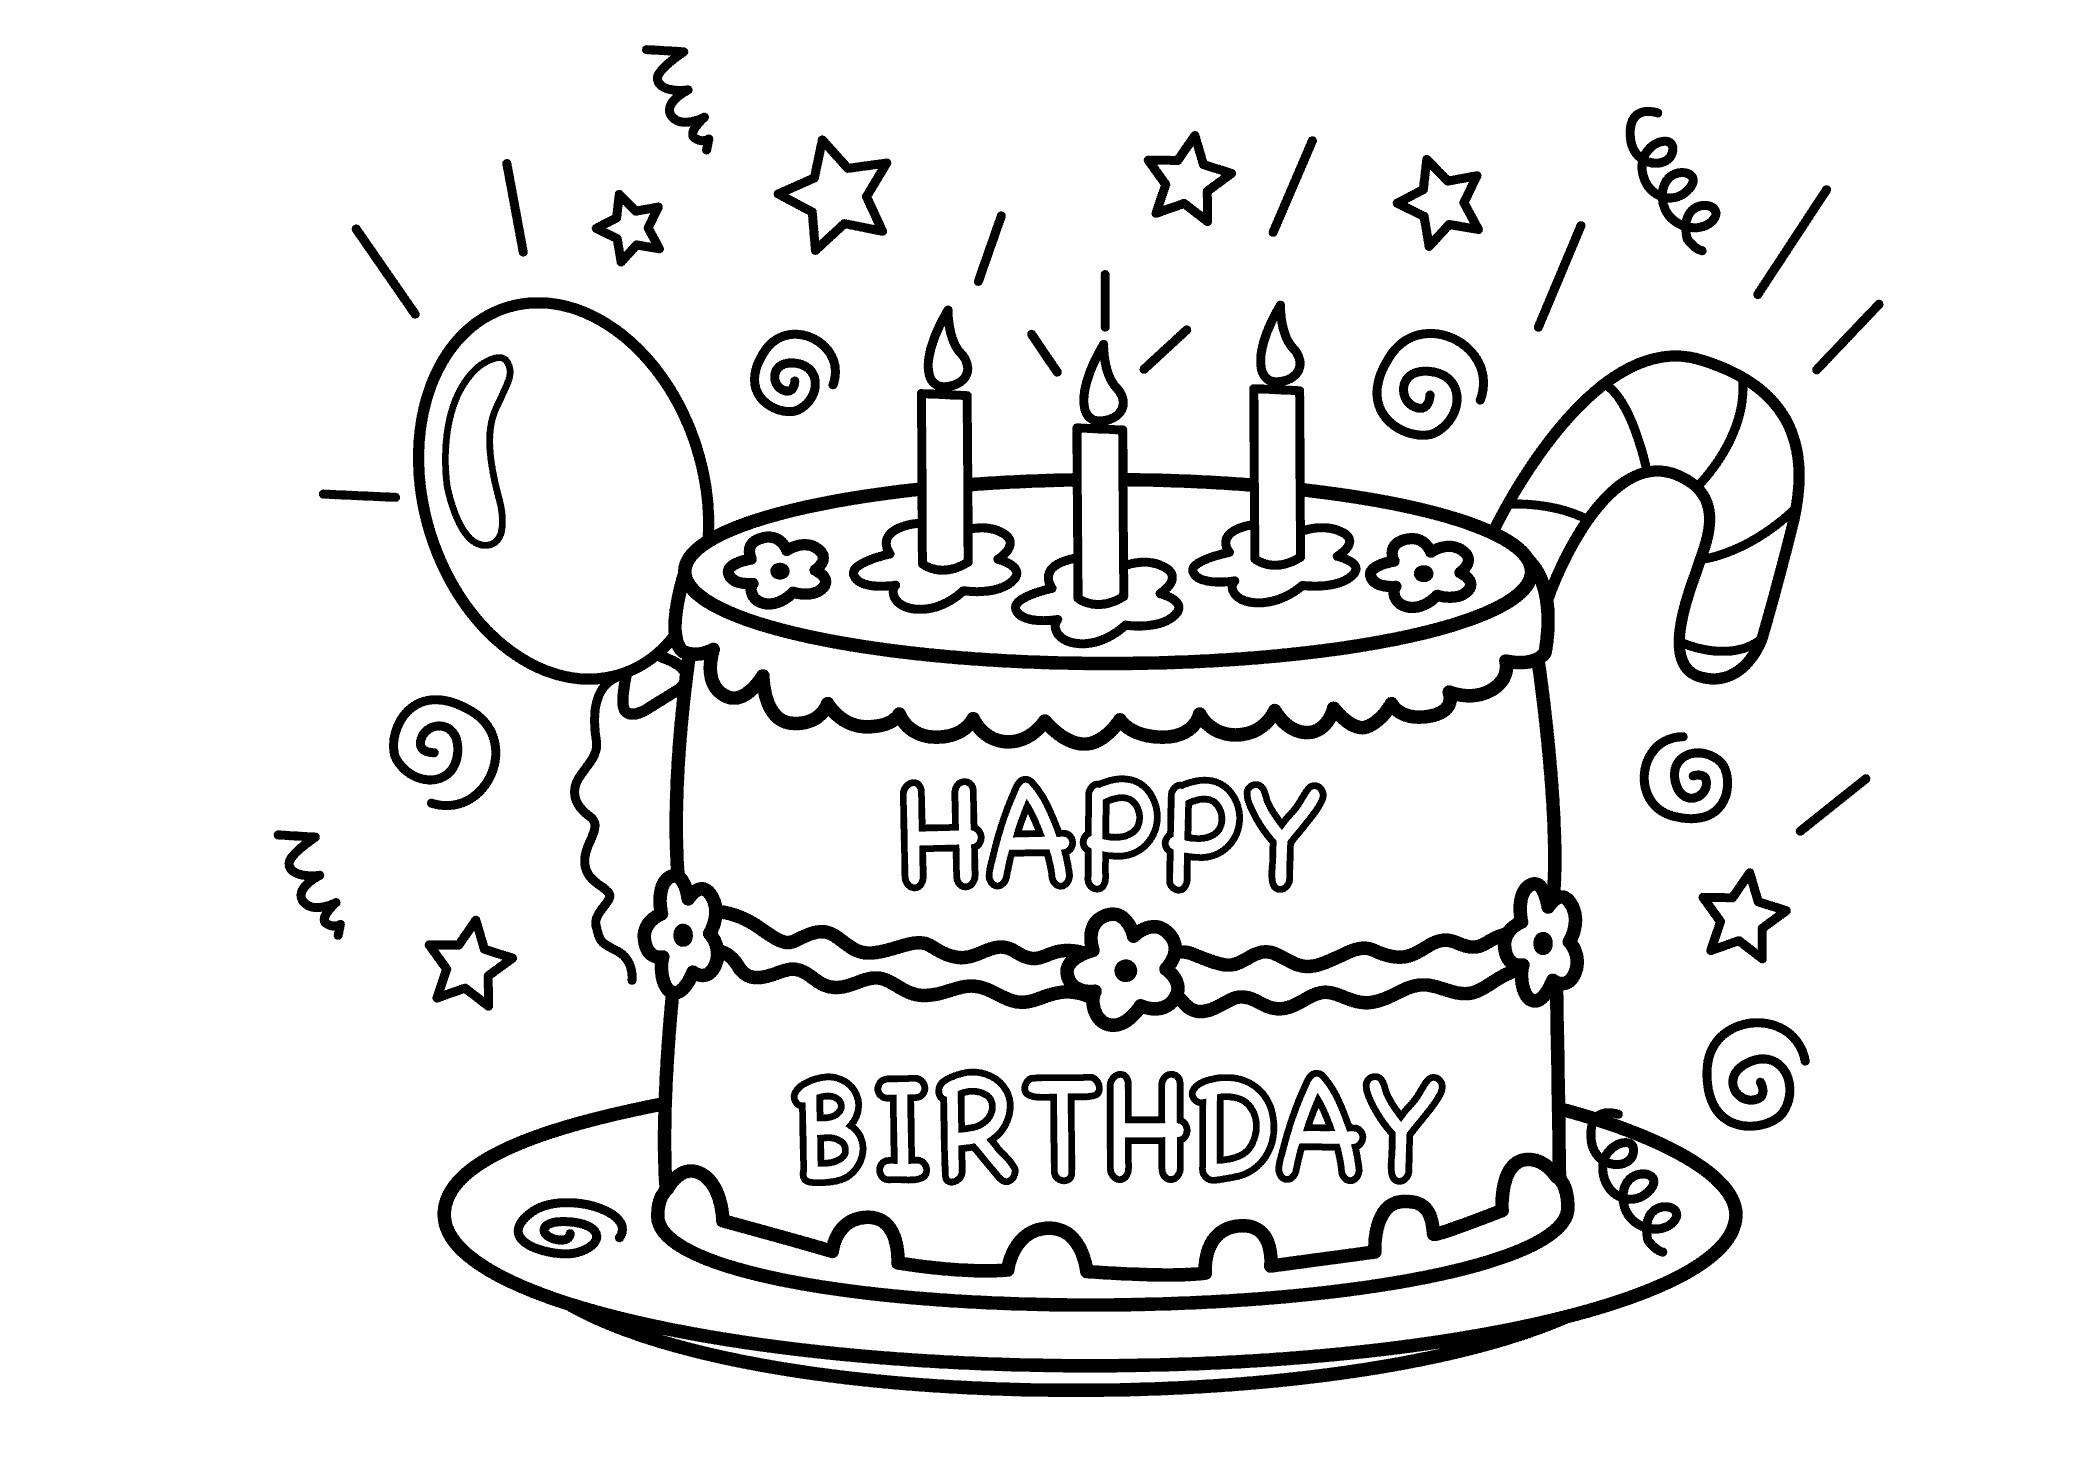 The Best Birthday Cake Coloring Page